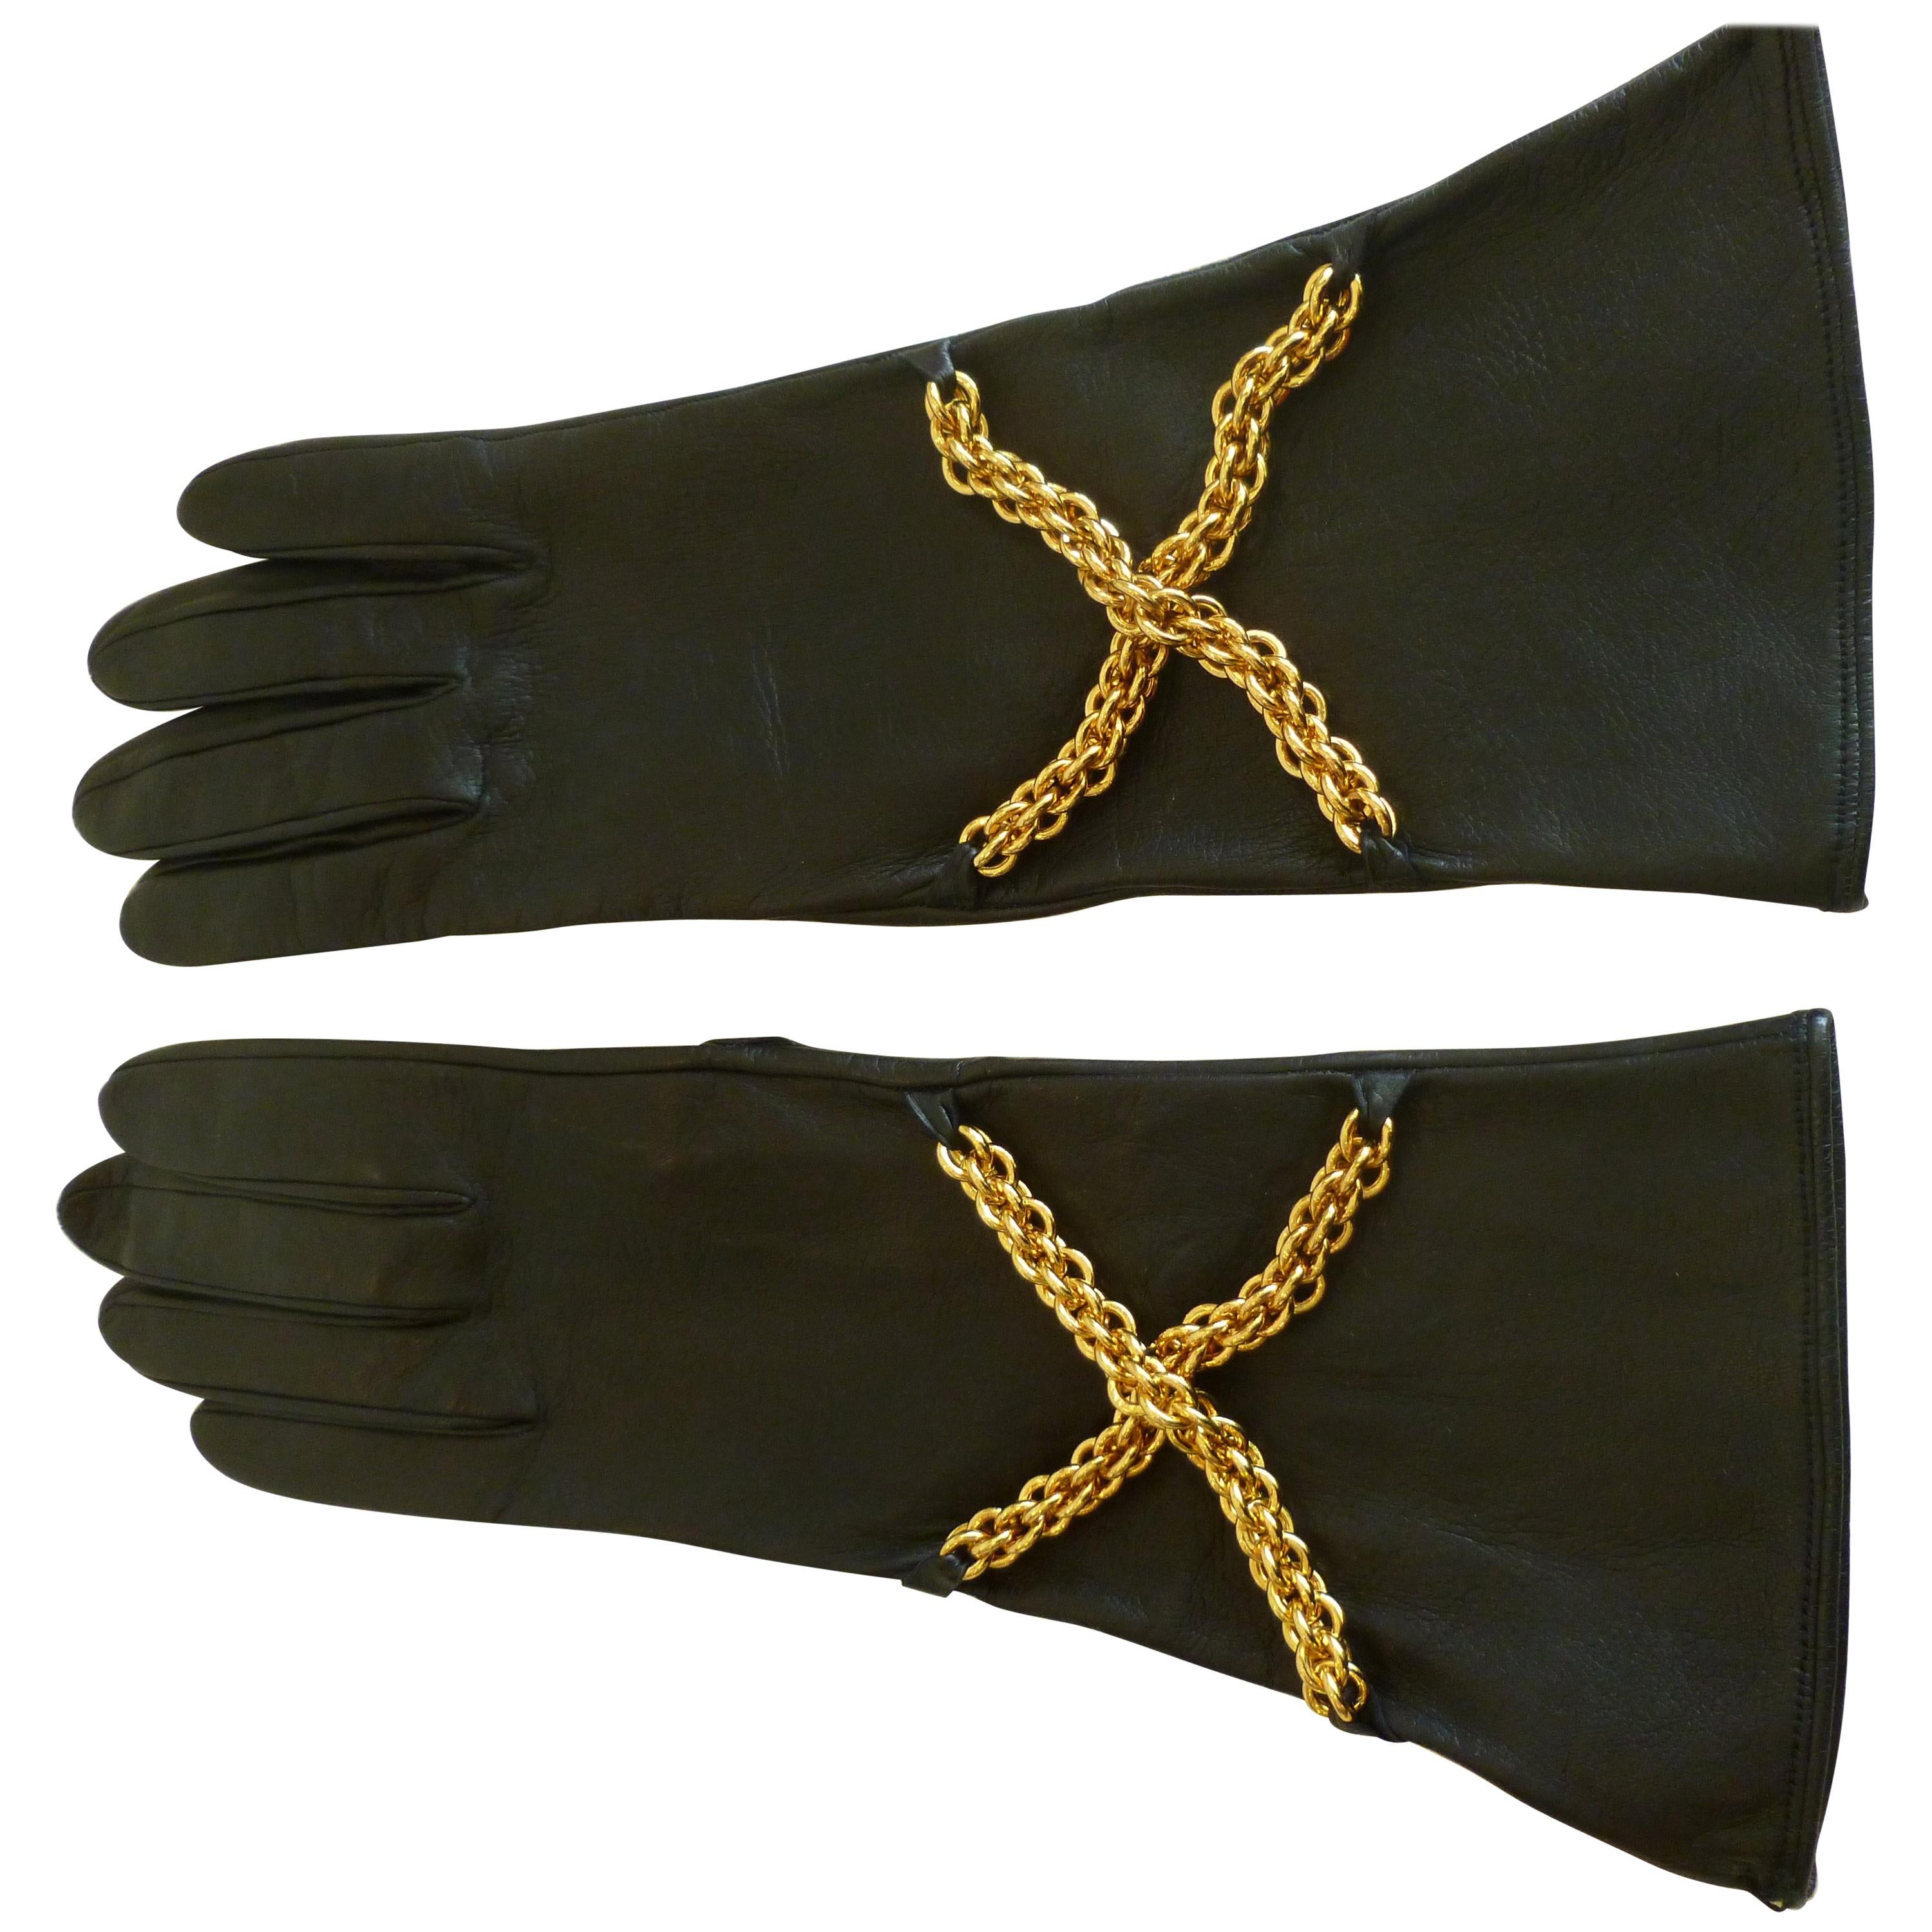  Paloma Picasso Back Leather and Brass Chain Gloves Pair Of 5